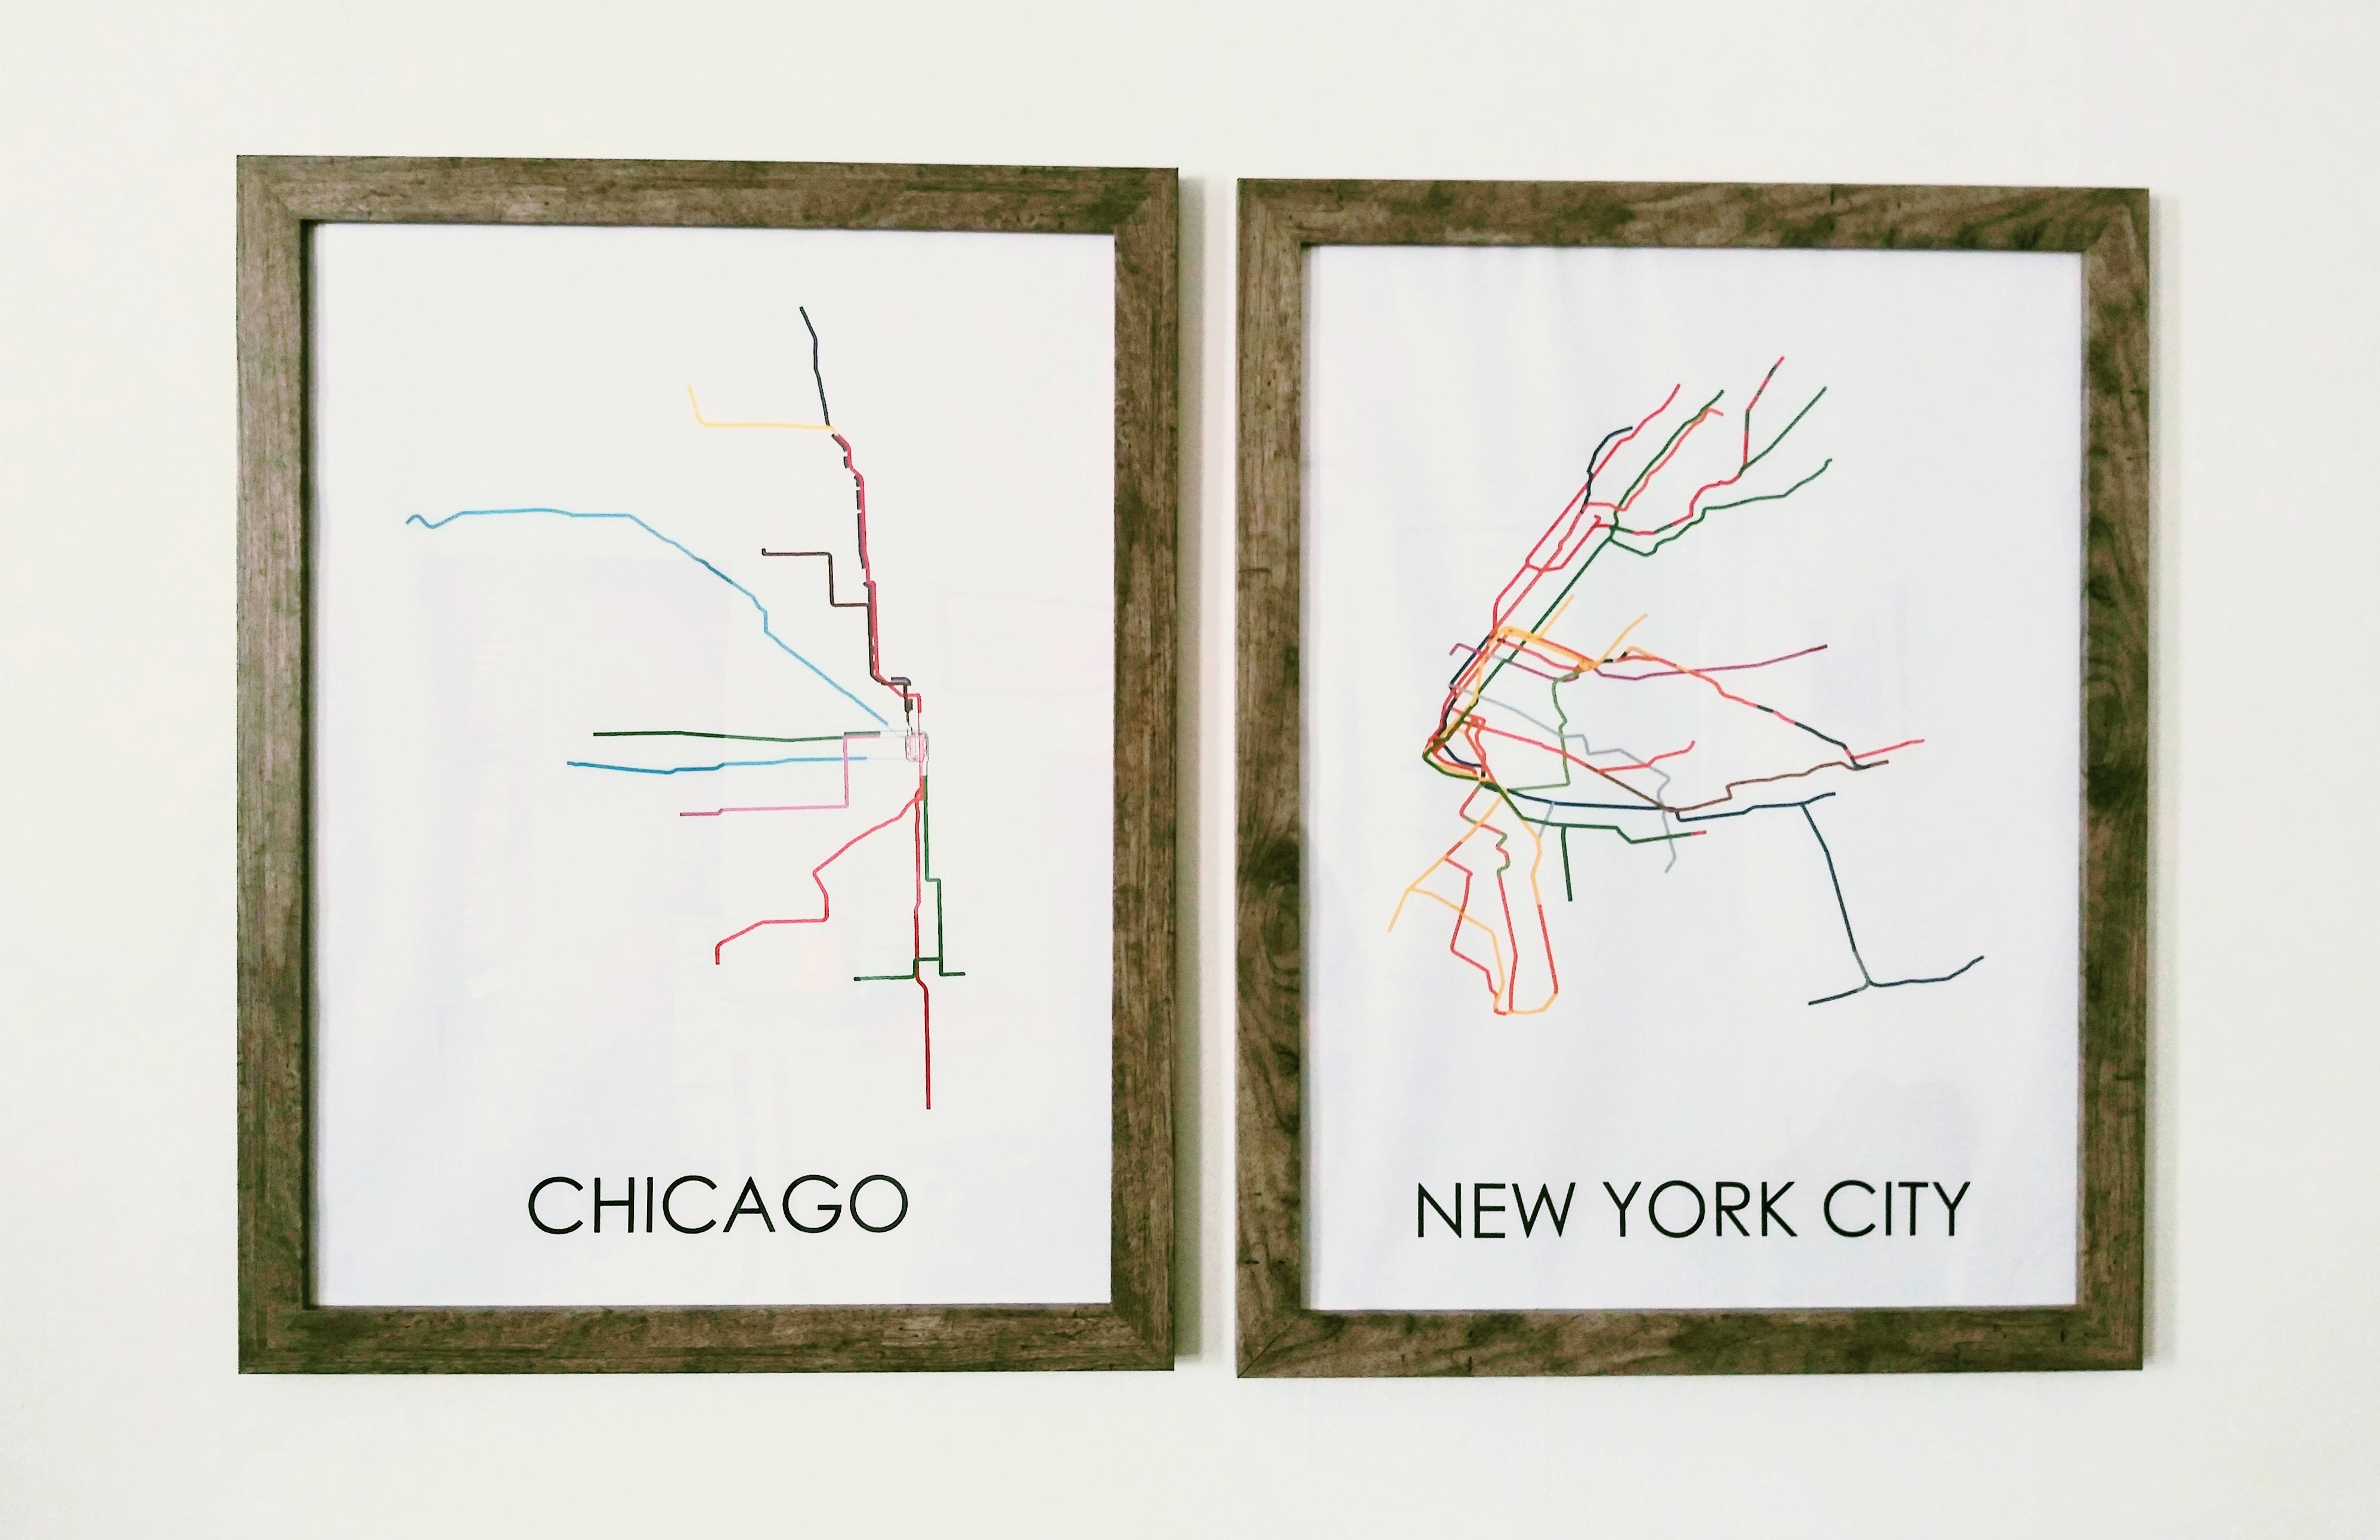 Finished product of Chicago and NYC transit map posters